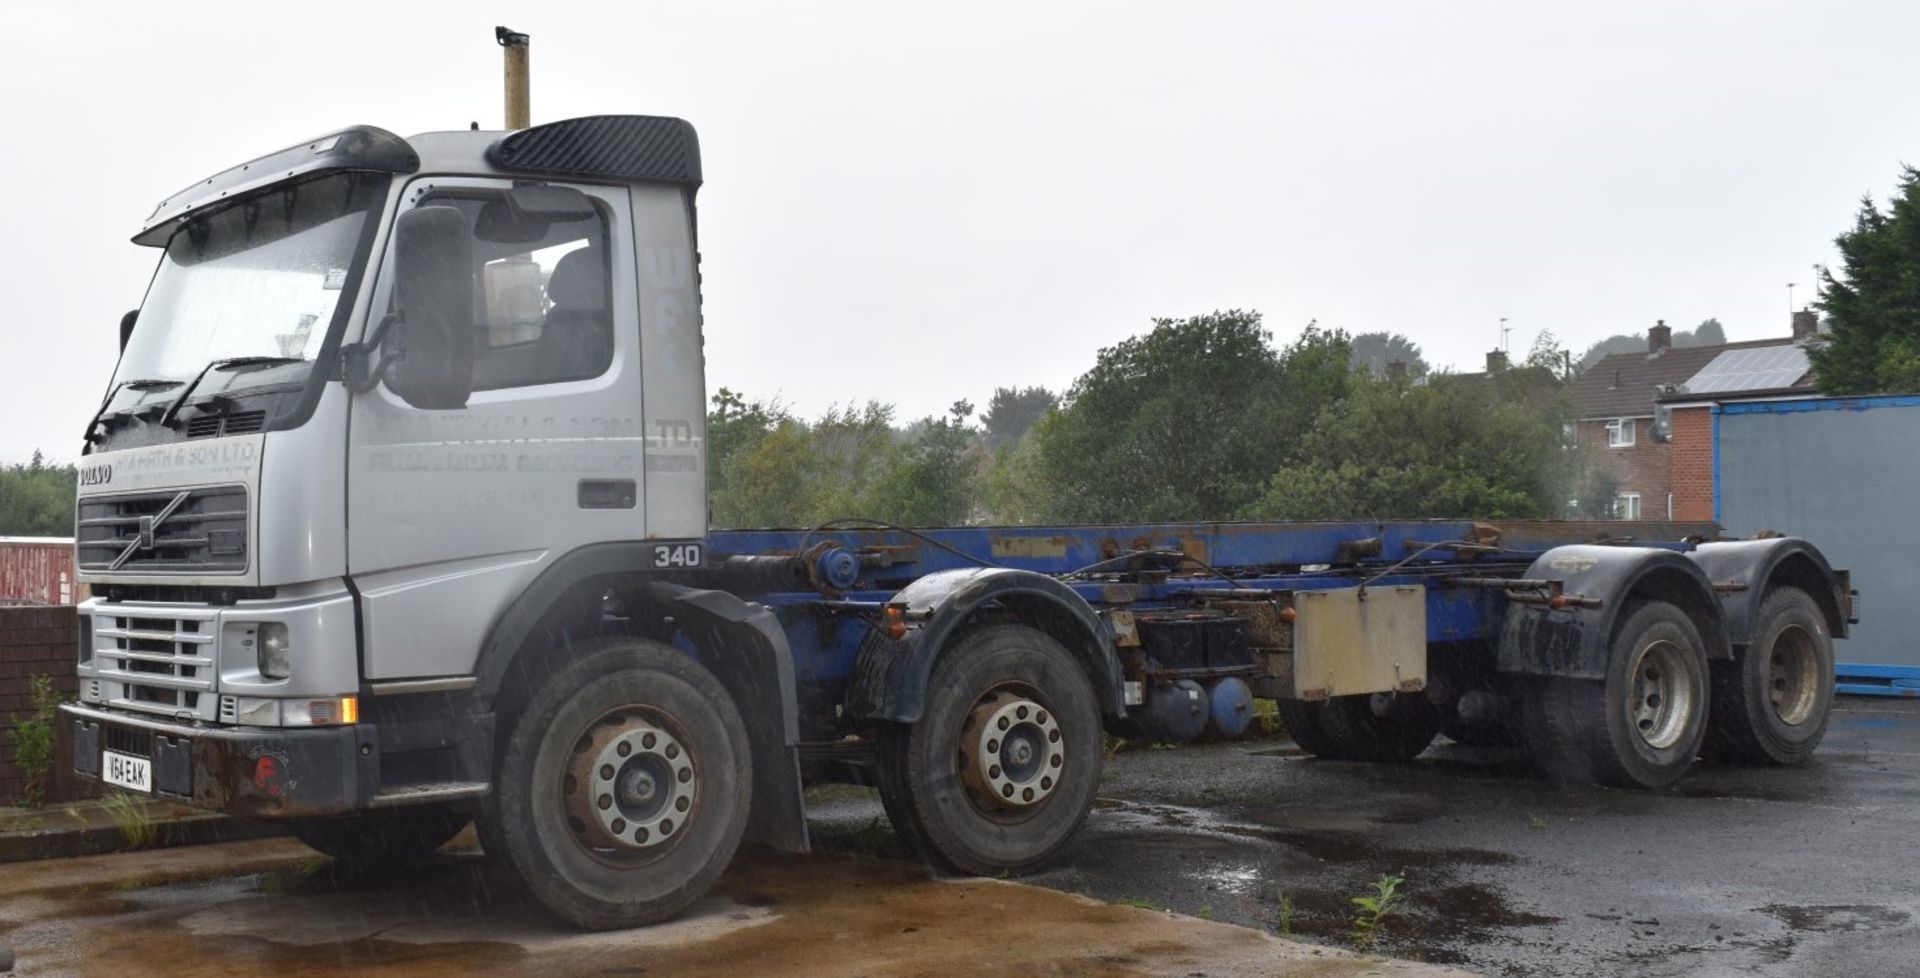 1 x Volvo 340 Plant Lorry With Tipper Chasis and Fitted Winch - CL547 - Location: South Yorkshire. - Image 3 of 25